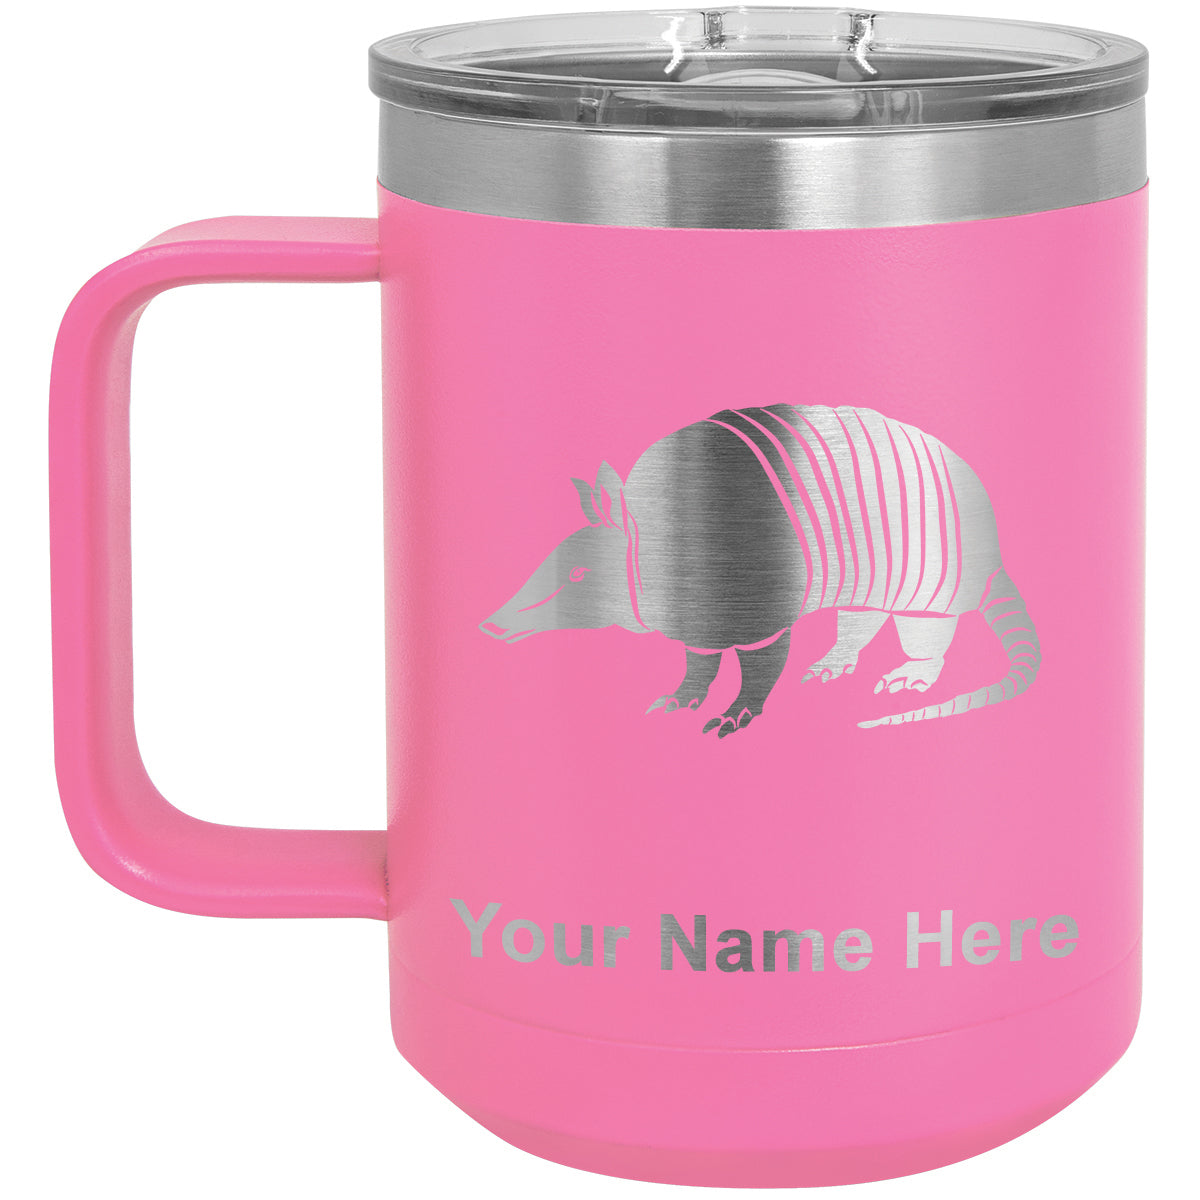 15oz Vacuum Insulated Coffee Mug, Armadillo, Personalized Engraving Included